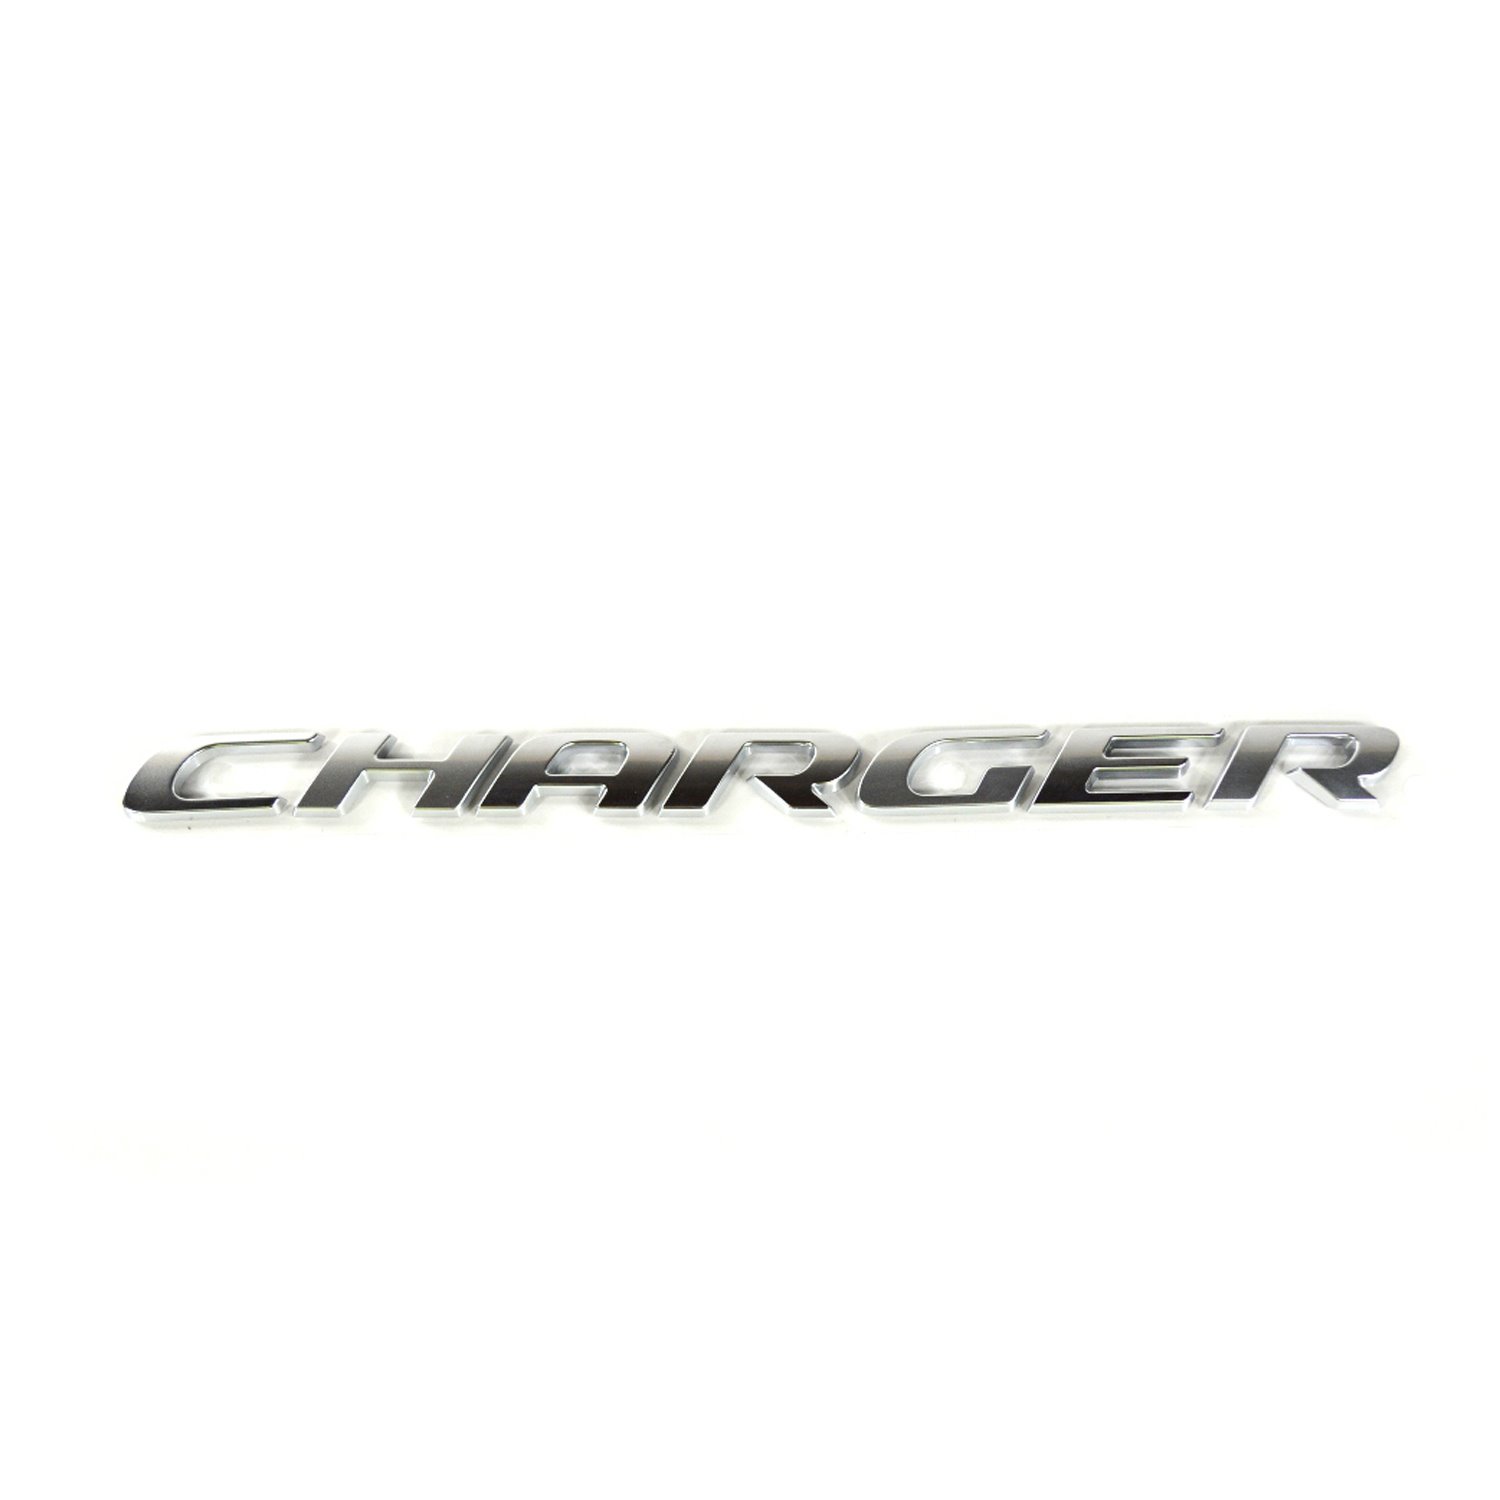 NAMEPLATE CHARGER